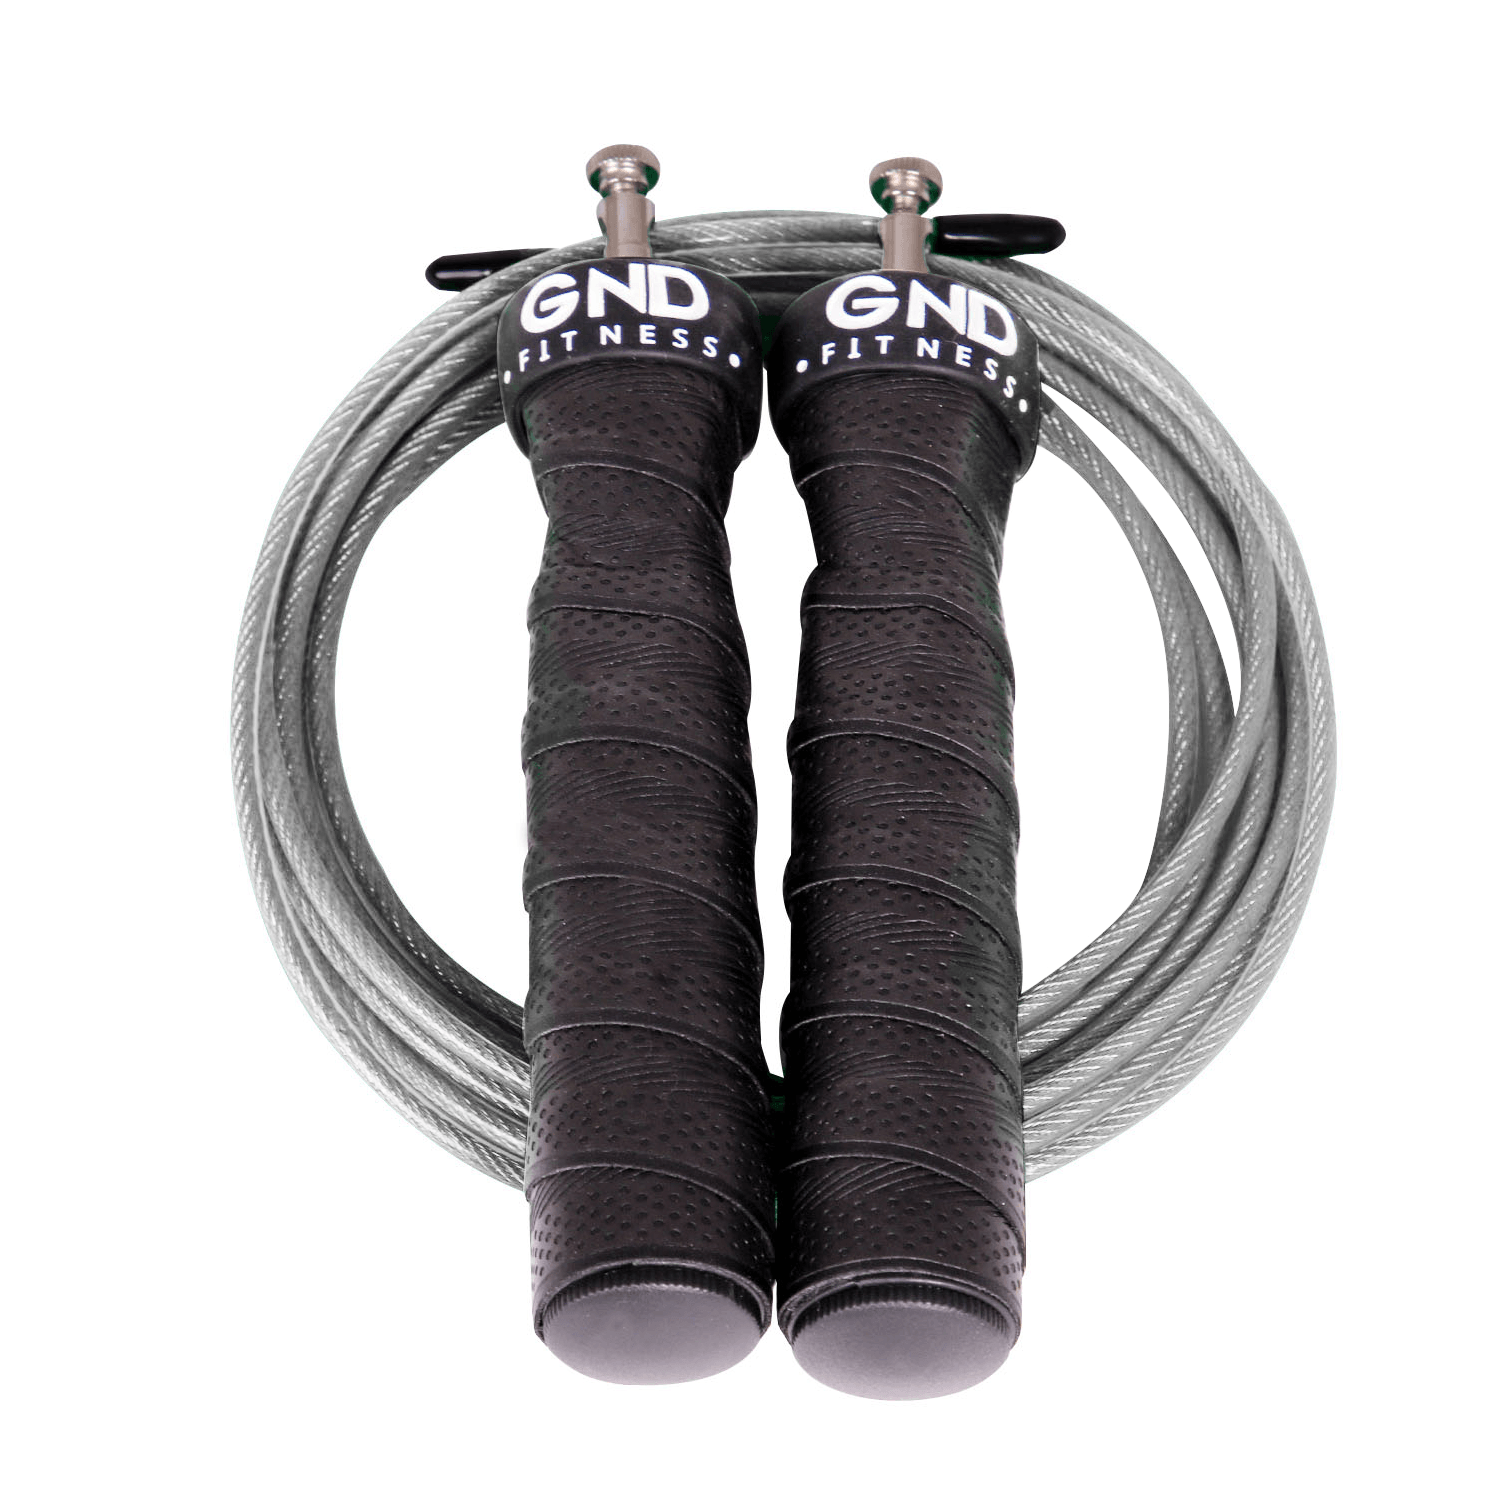 GND SR Speed Skipping Rope // Single Ball Bearing // Silver - SR Skipping Rope- GND Fitness